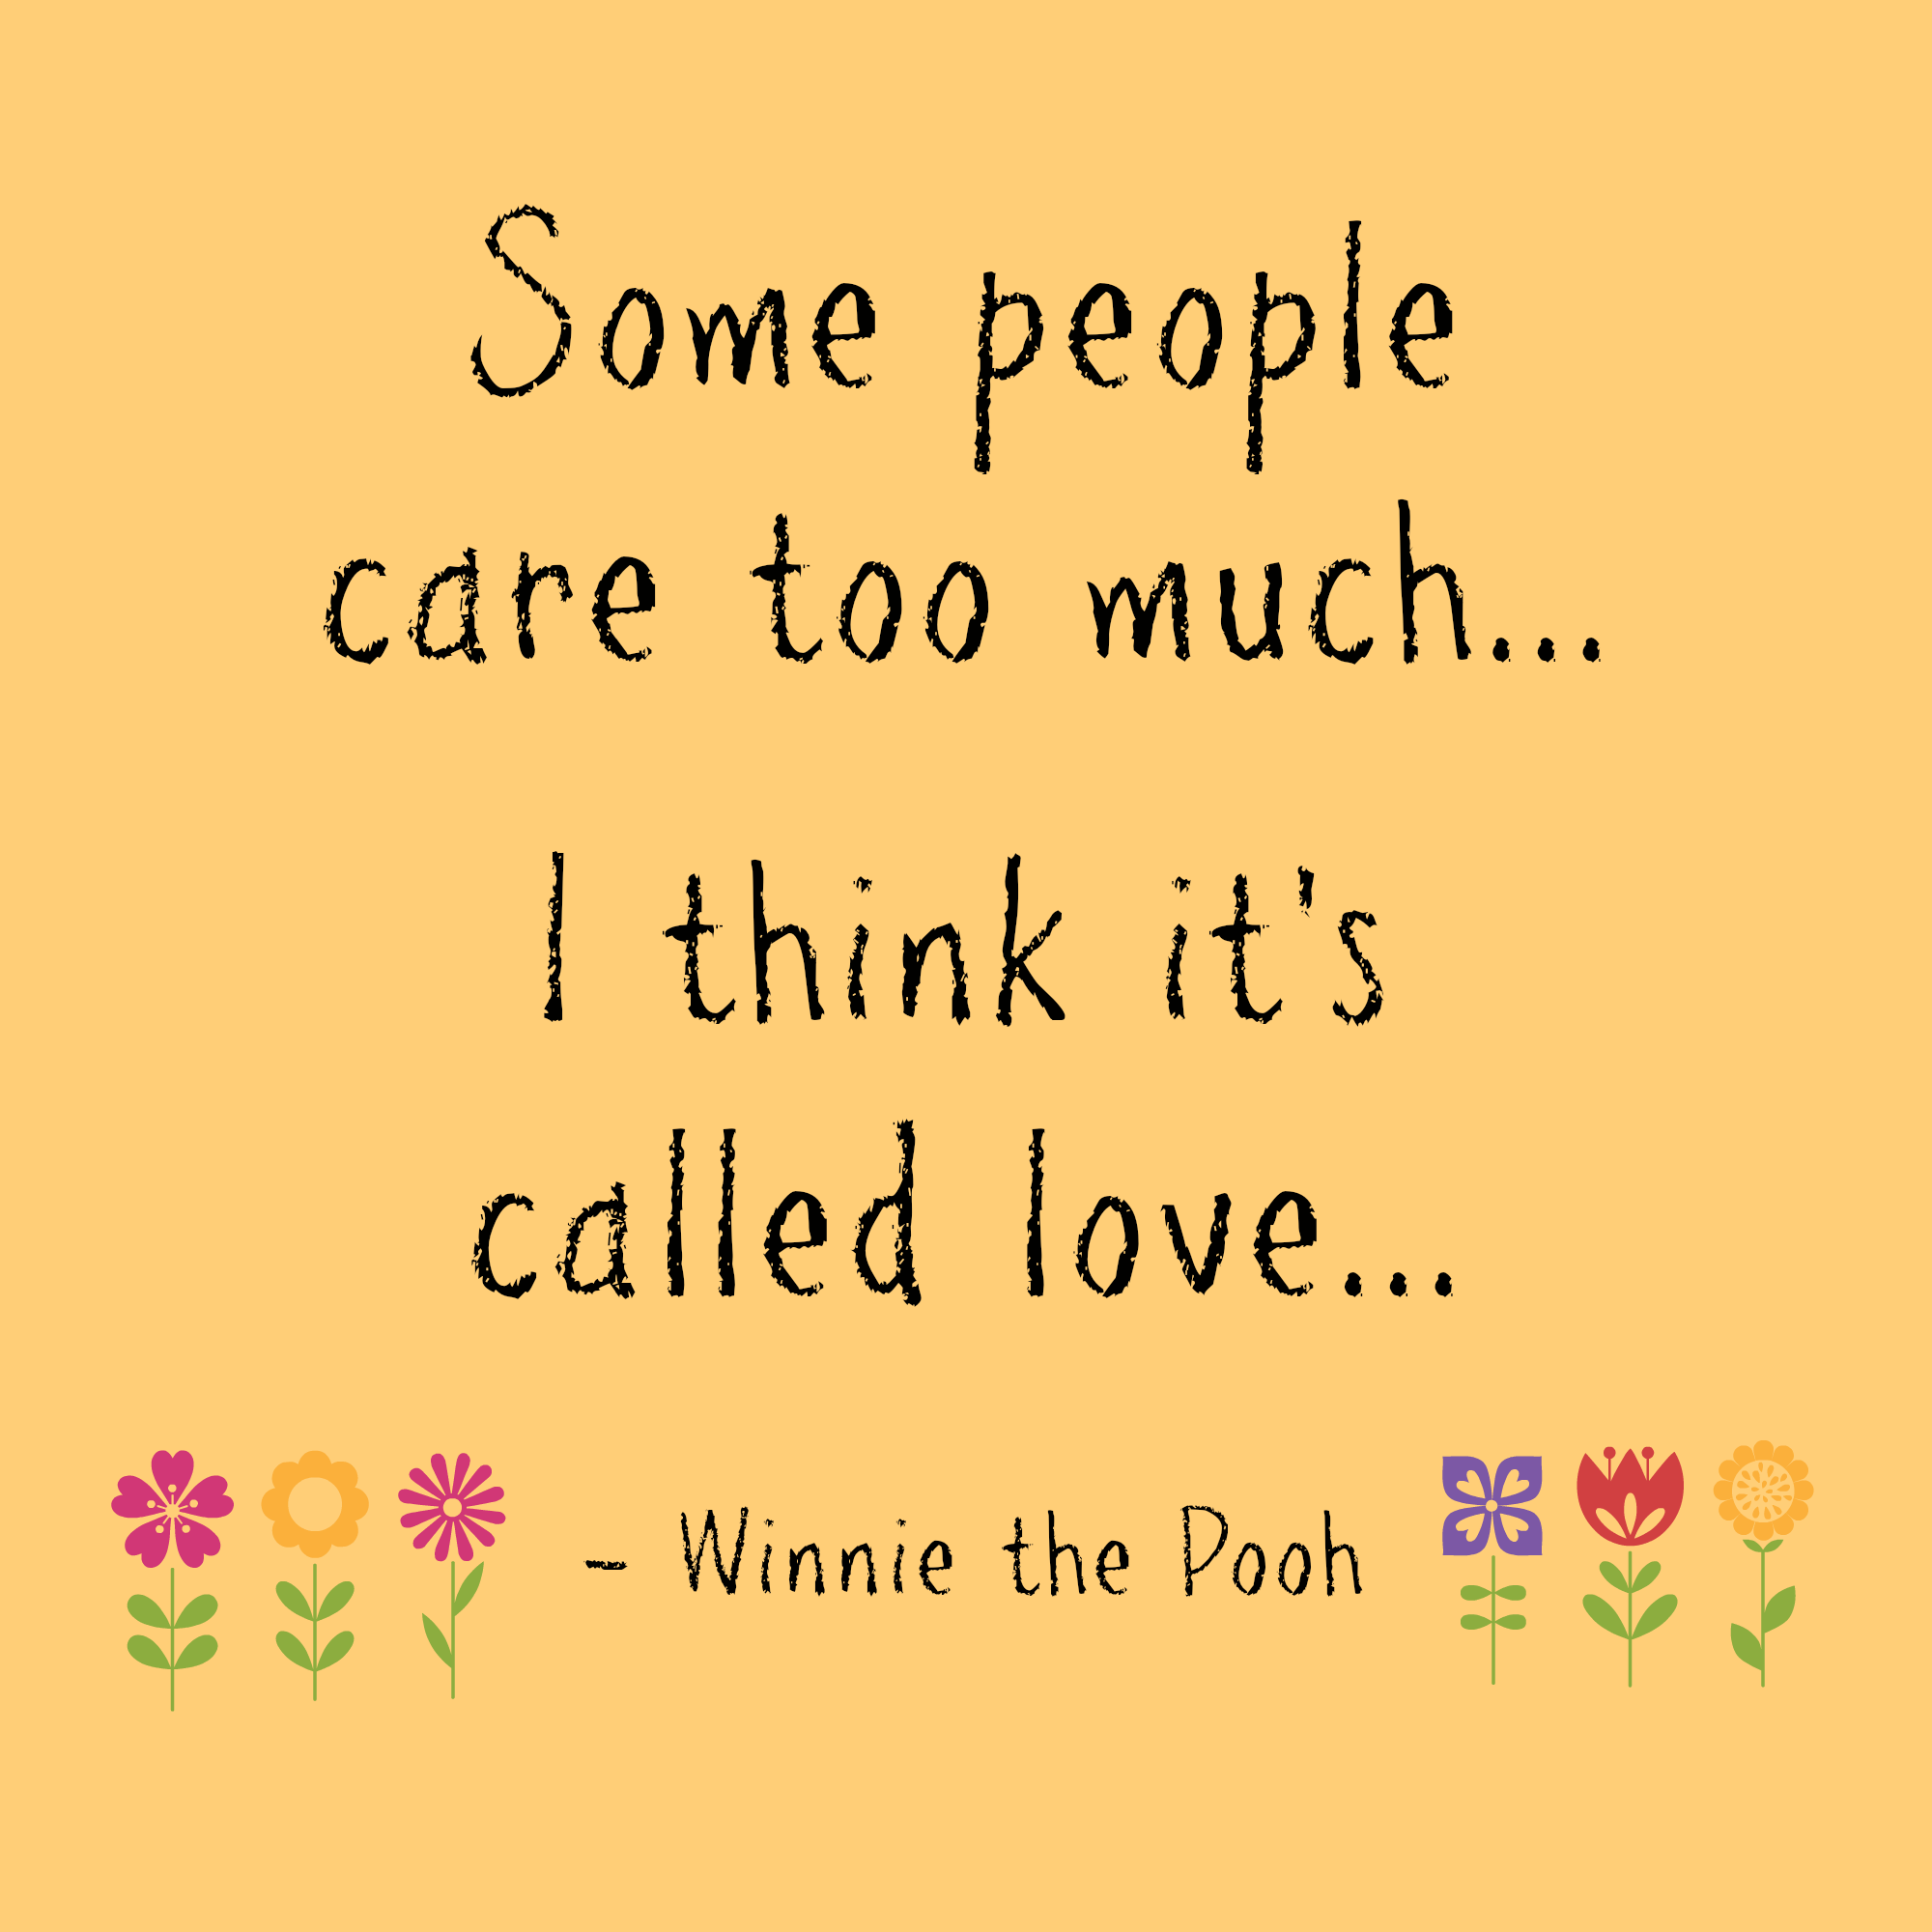 Winnie The Pooh Quotes About Friendship. QuotesGram2000 x 2000